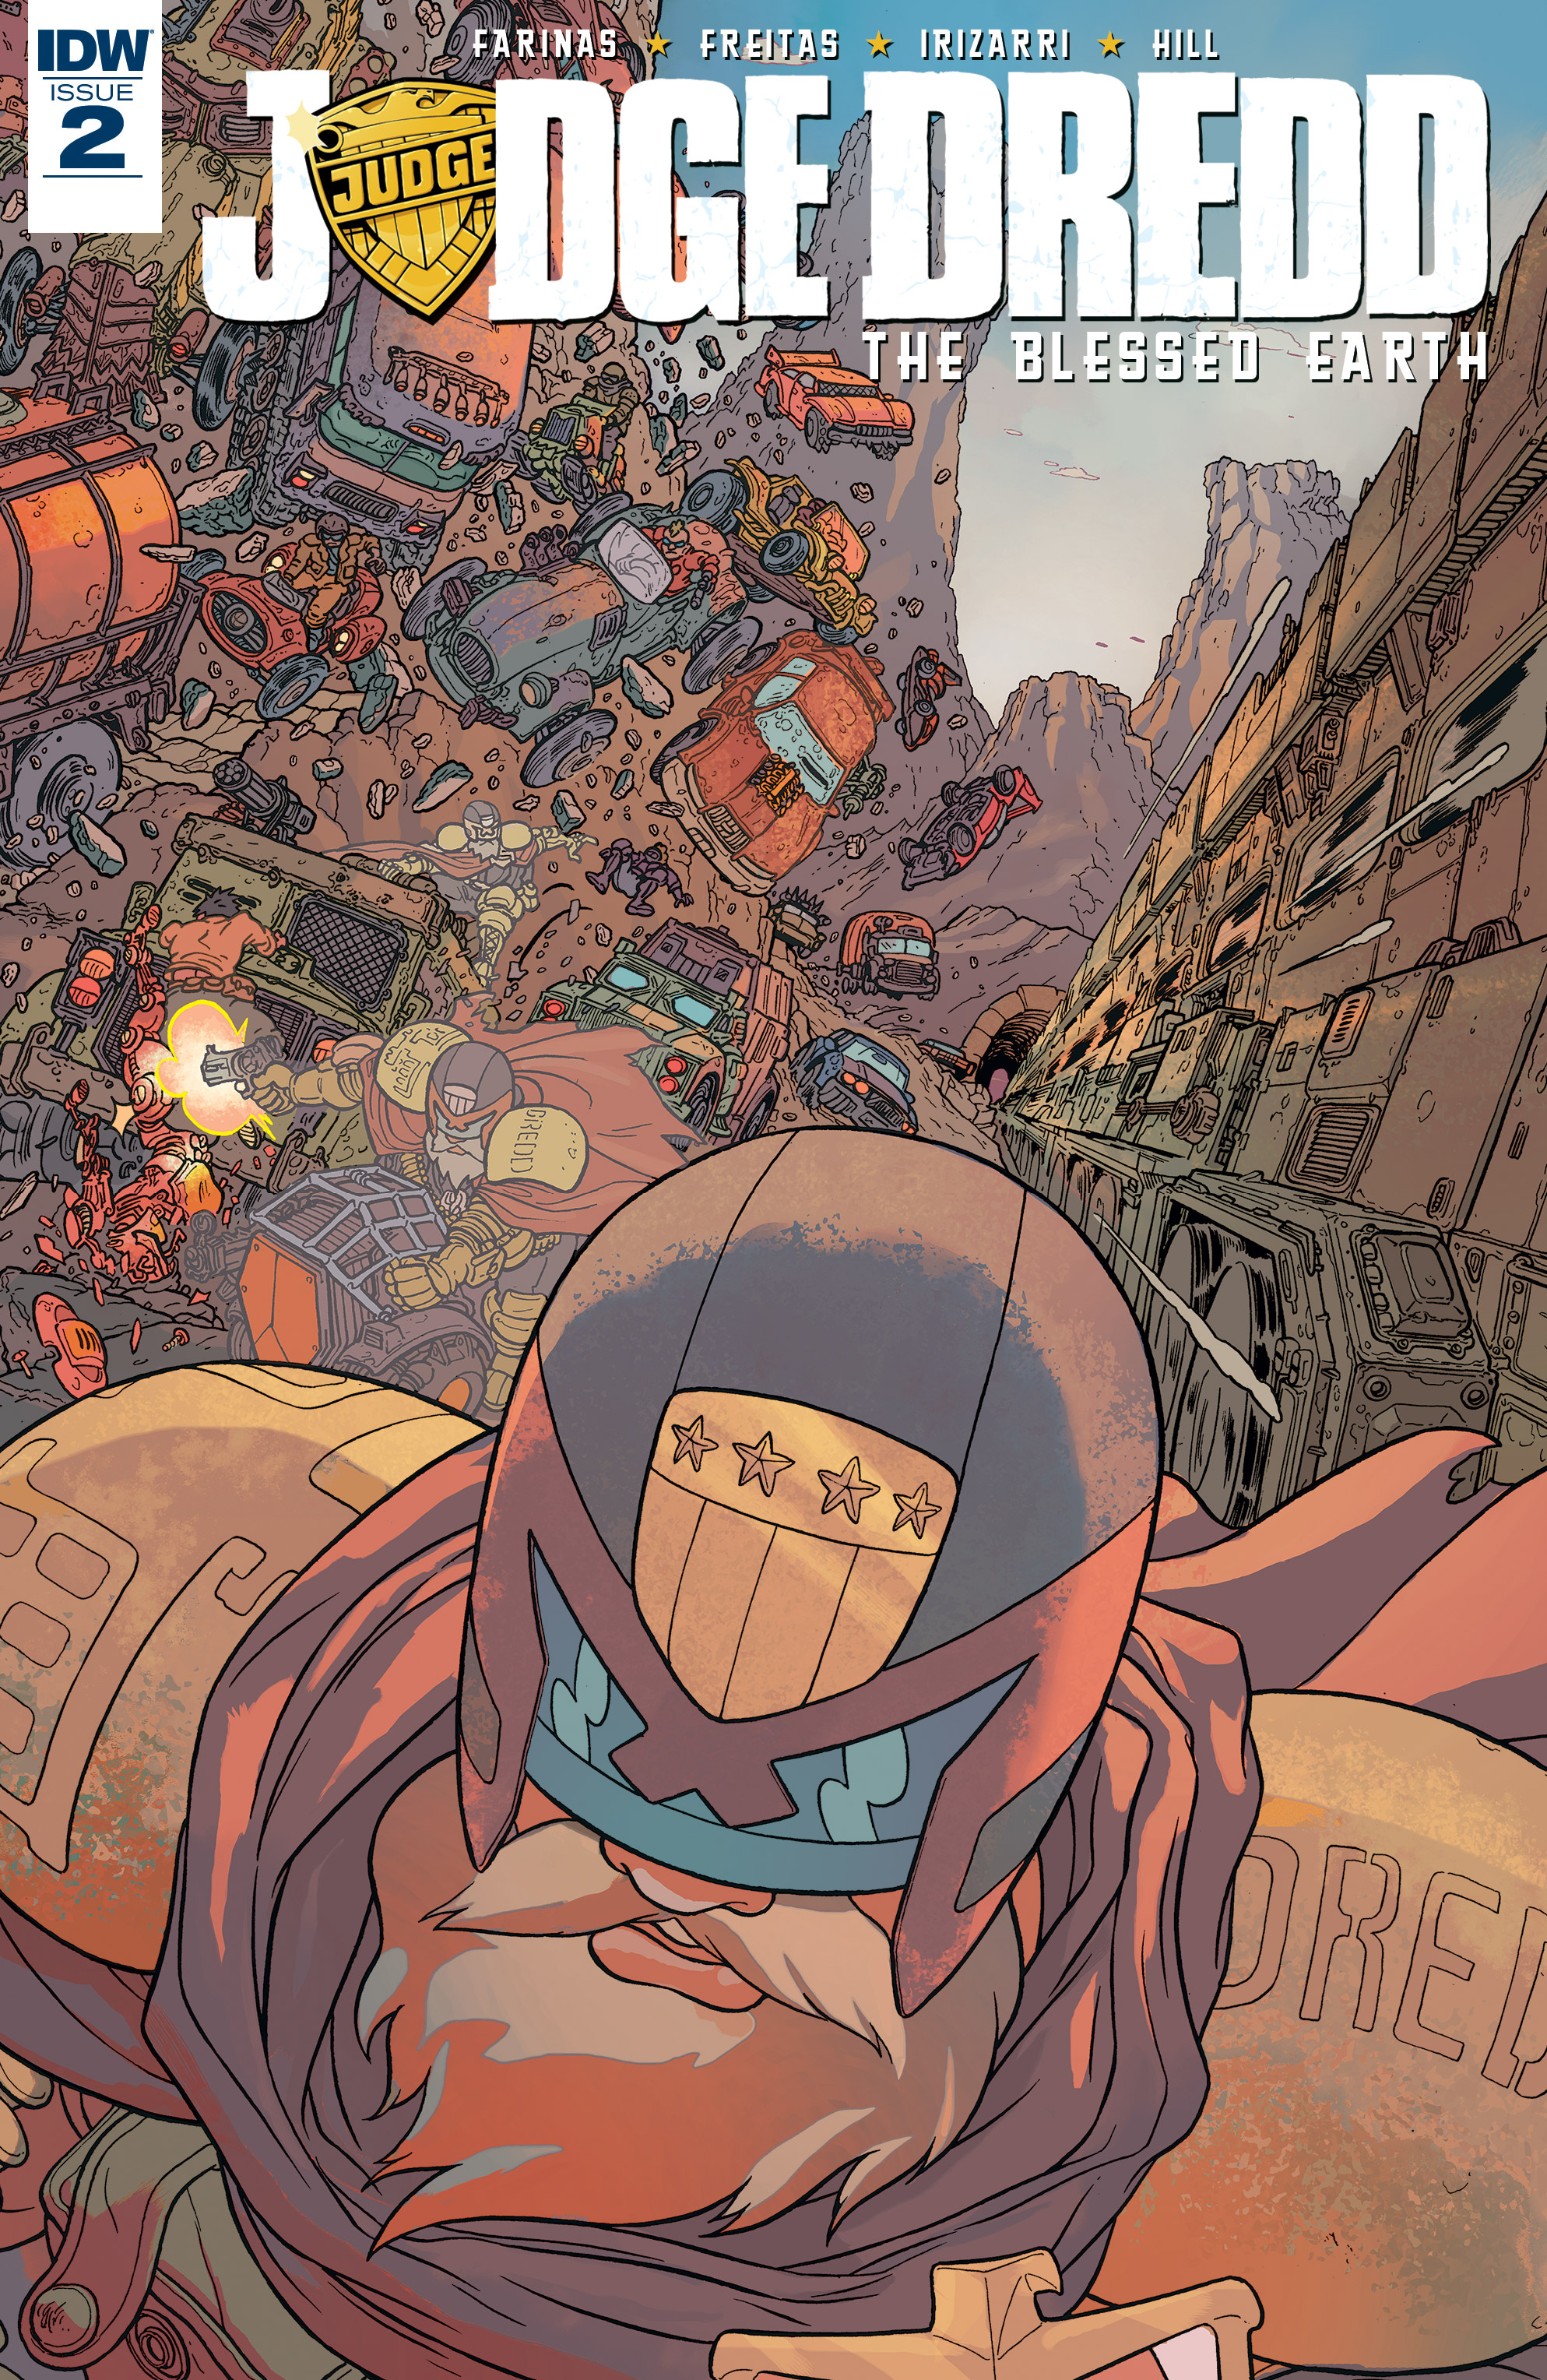 Read online Judge Dredd: The Blessed Earth comic -  Issue #2 - 1